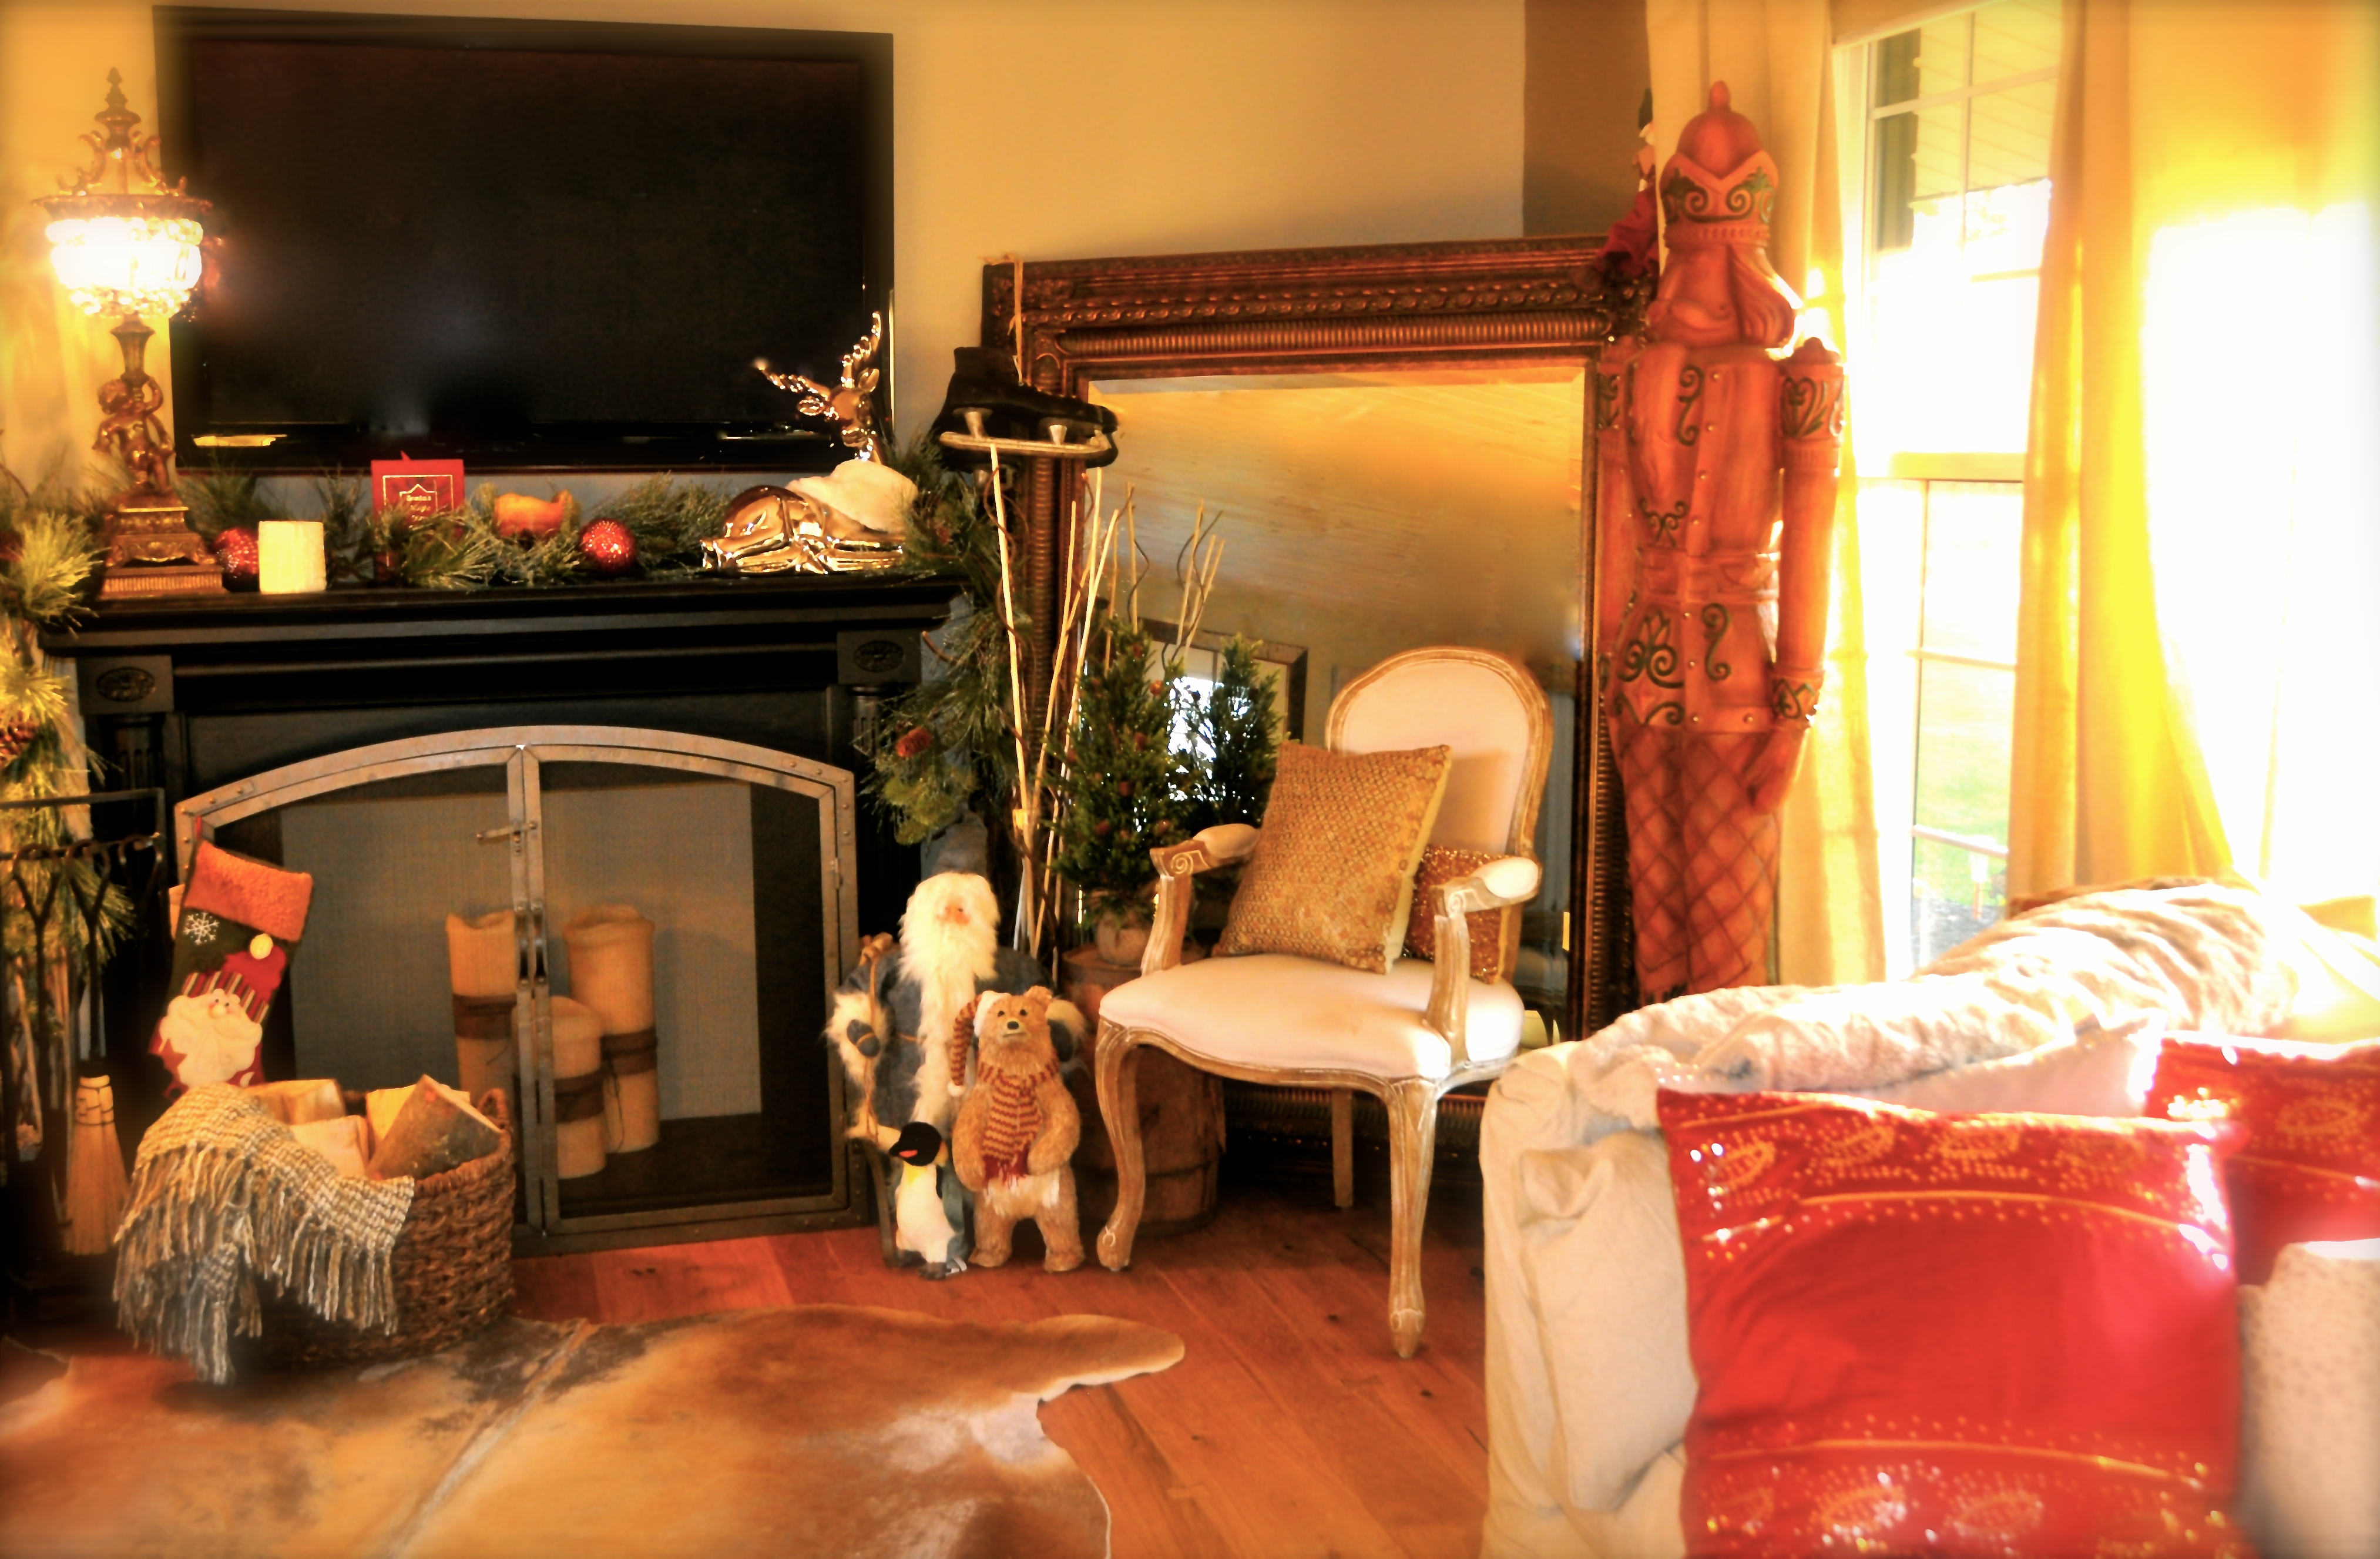 Staging that cozy fireside atmosphere for the holidays. | Corrie Gallant